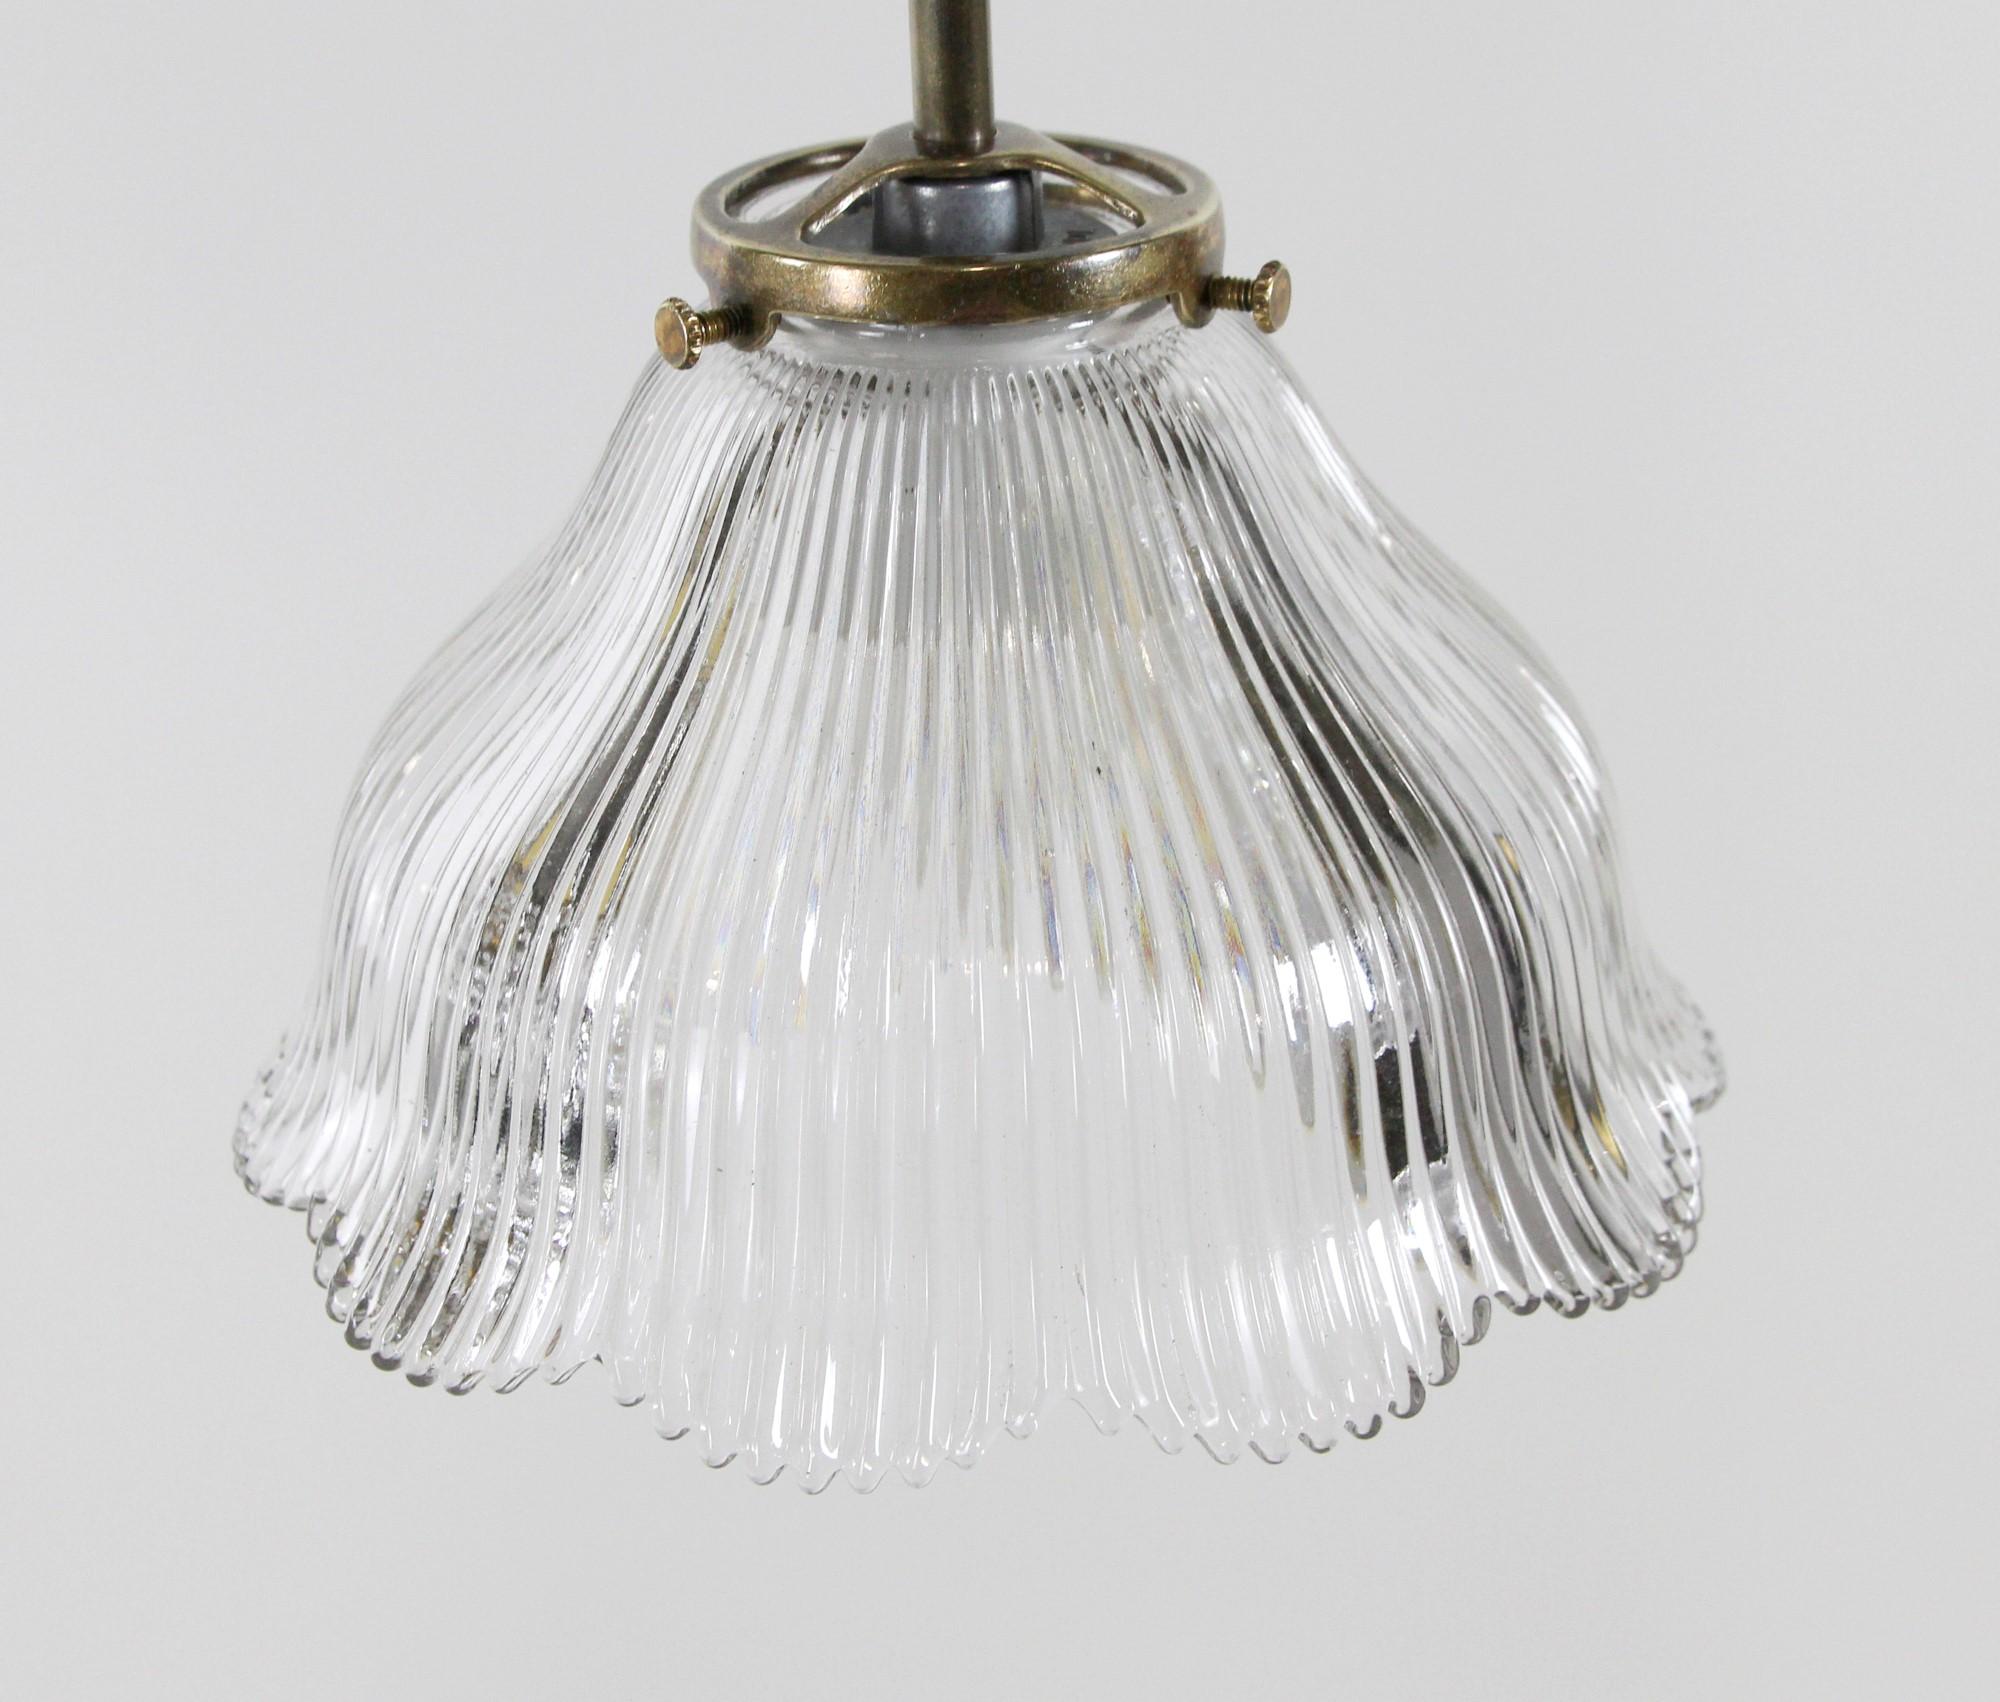 North American 2010s Brass Pendant Light with Two Antique Ruffled Prism Glass Shades